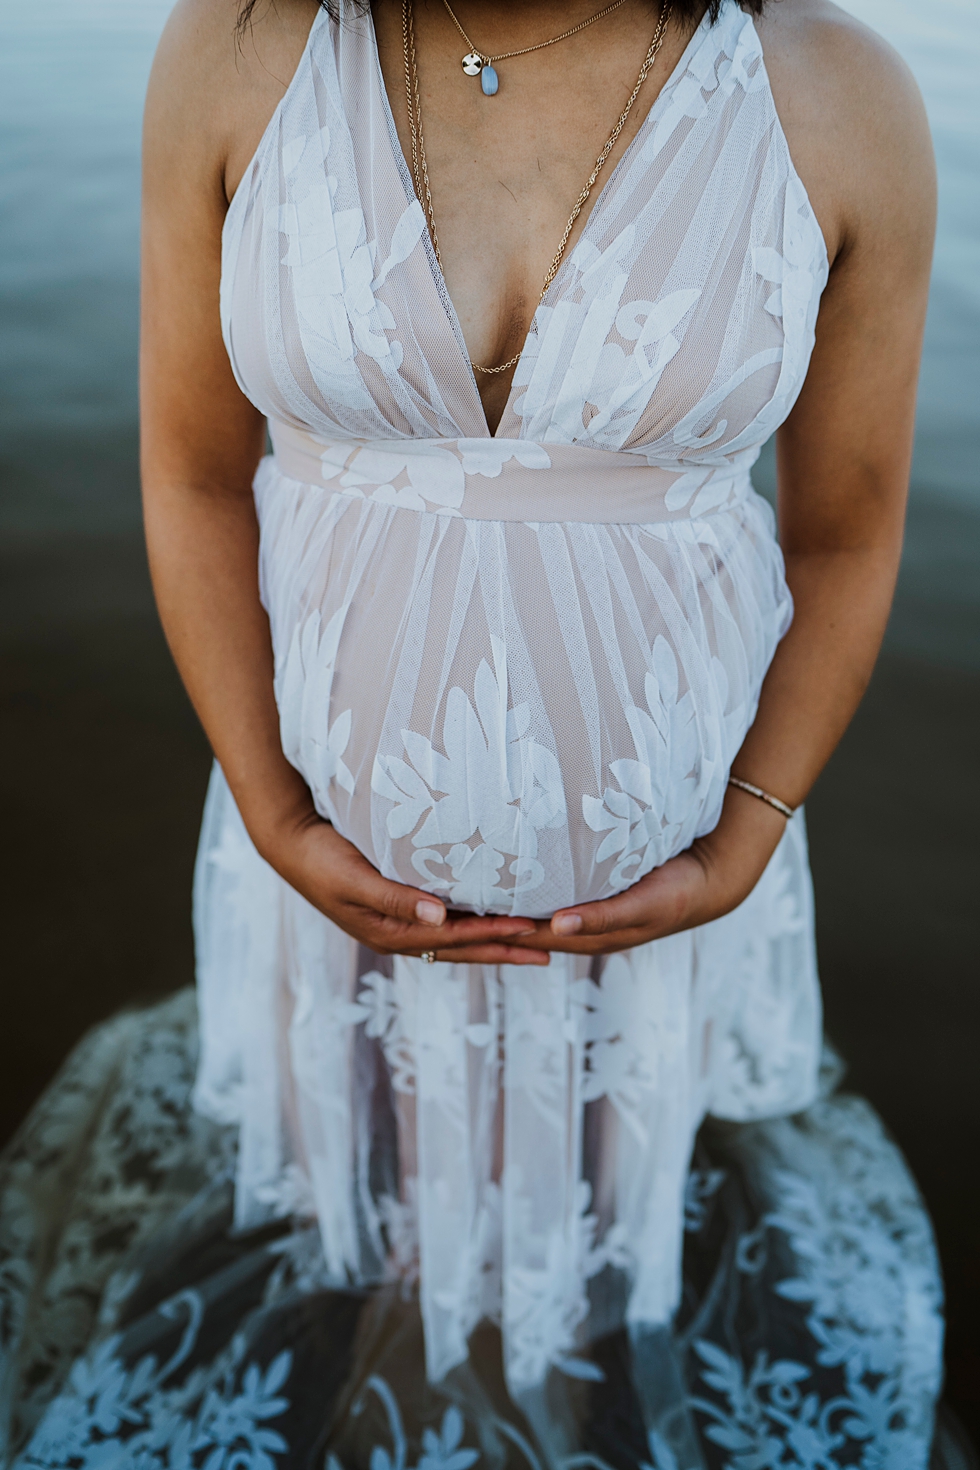  MATERNITY PHOTO SHOOT BABY BUMP FOCUS NEUTRAL AND WHITE LACE DRESS WITH SHEER BOTTOM FLOATING IN THE WATER MATERNITY PHOTOGRAPHER MAMMA TO BE #photographer #maternityphotos #pregnancy #babybump #maternityphotoshoot #cincinnatiphotographer #louisvill